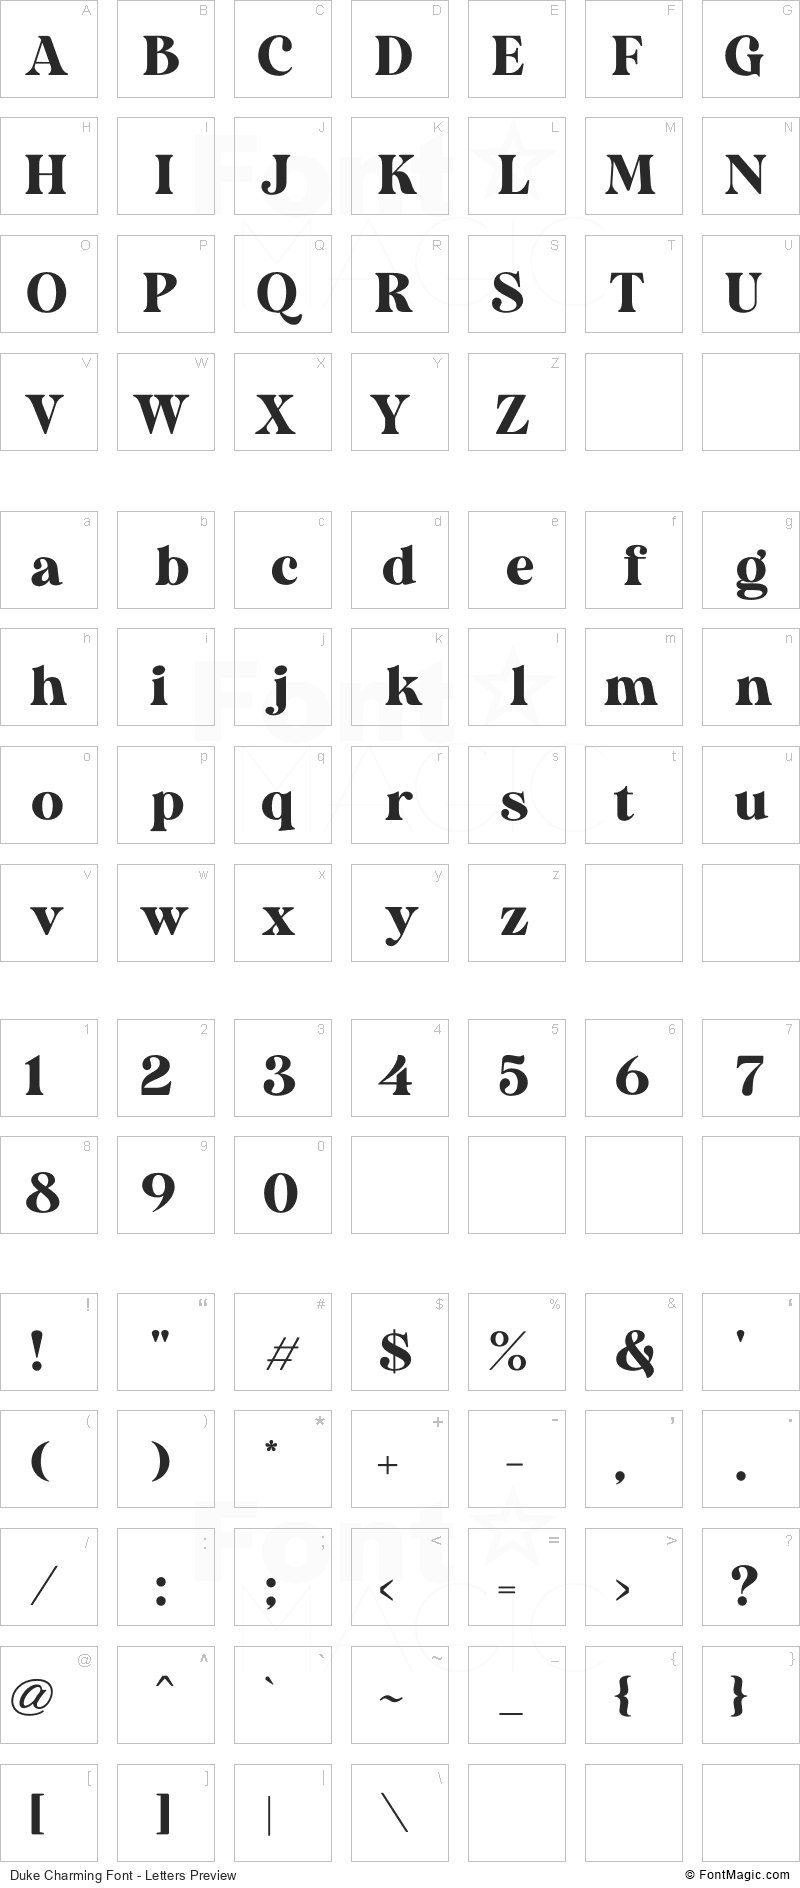 Duke Charming Font - All Latters Preview Chart